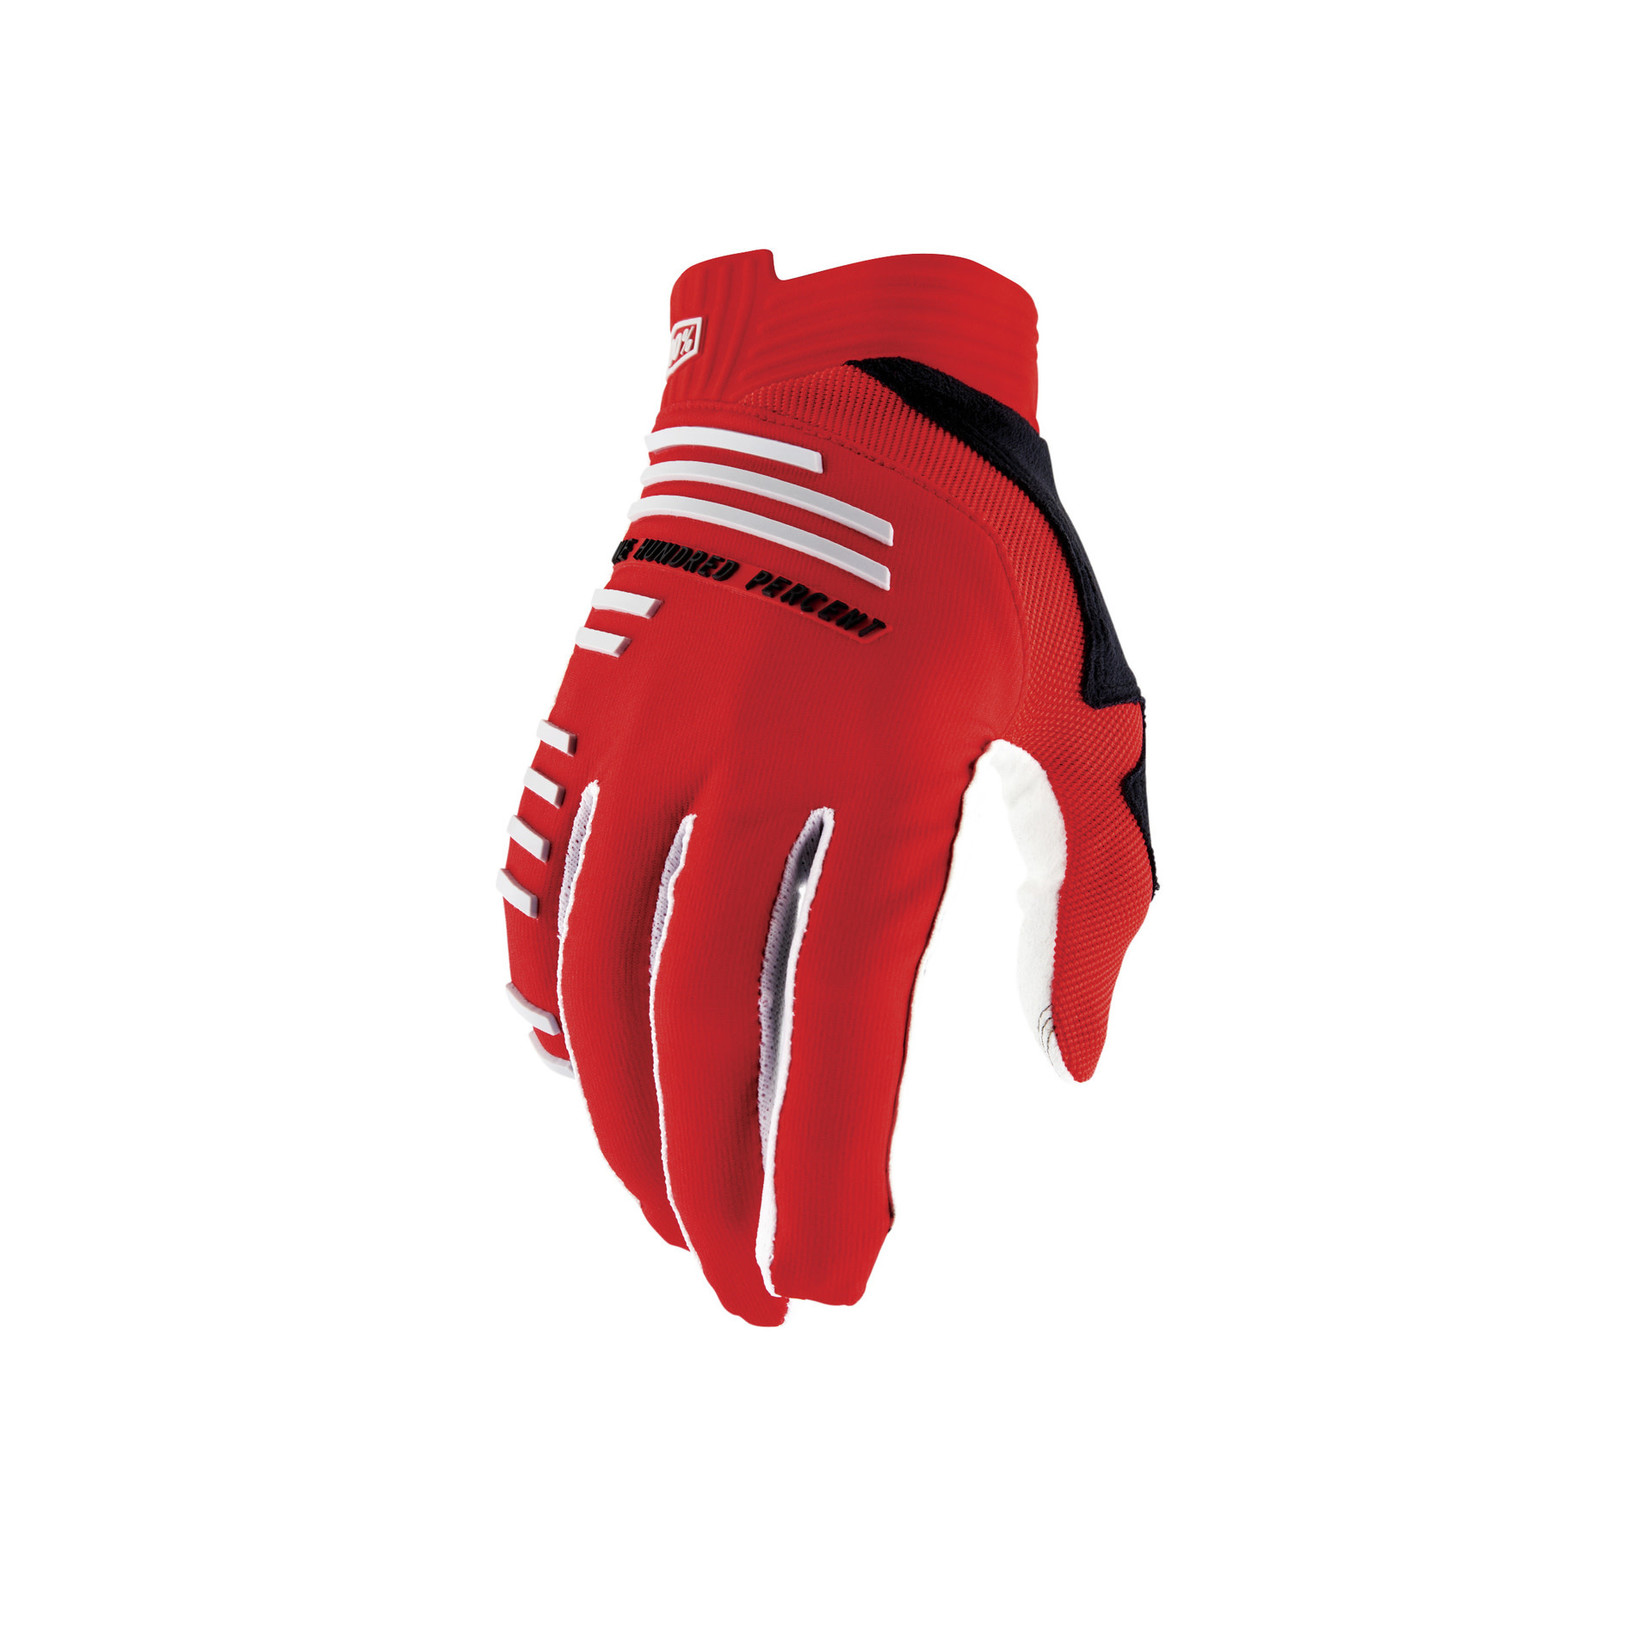 100 Percent 100% R-Core Bike Cycling Gloves Racer - Red Silicone Printed Palm